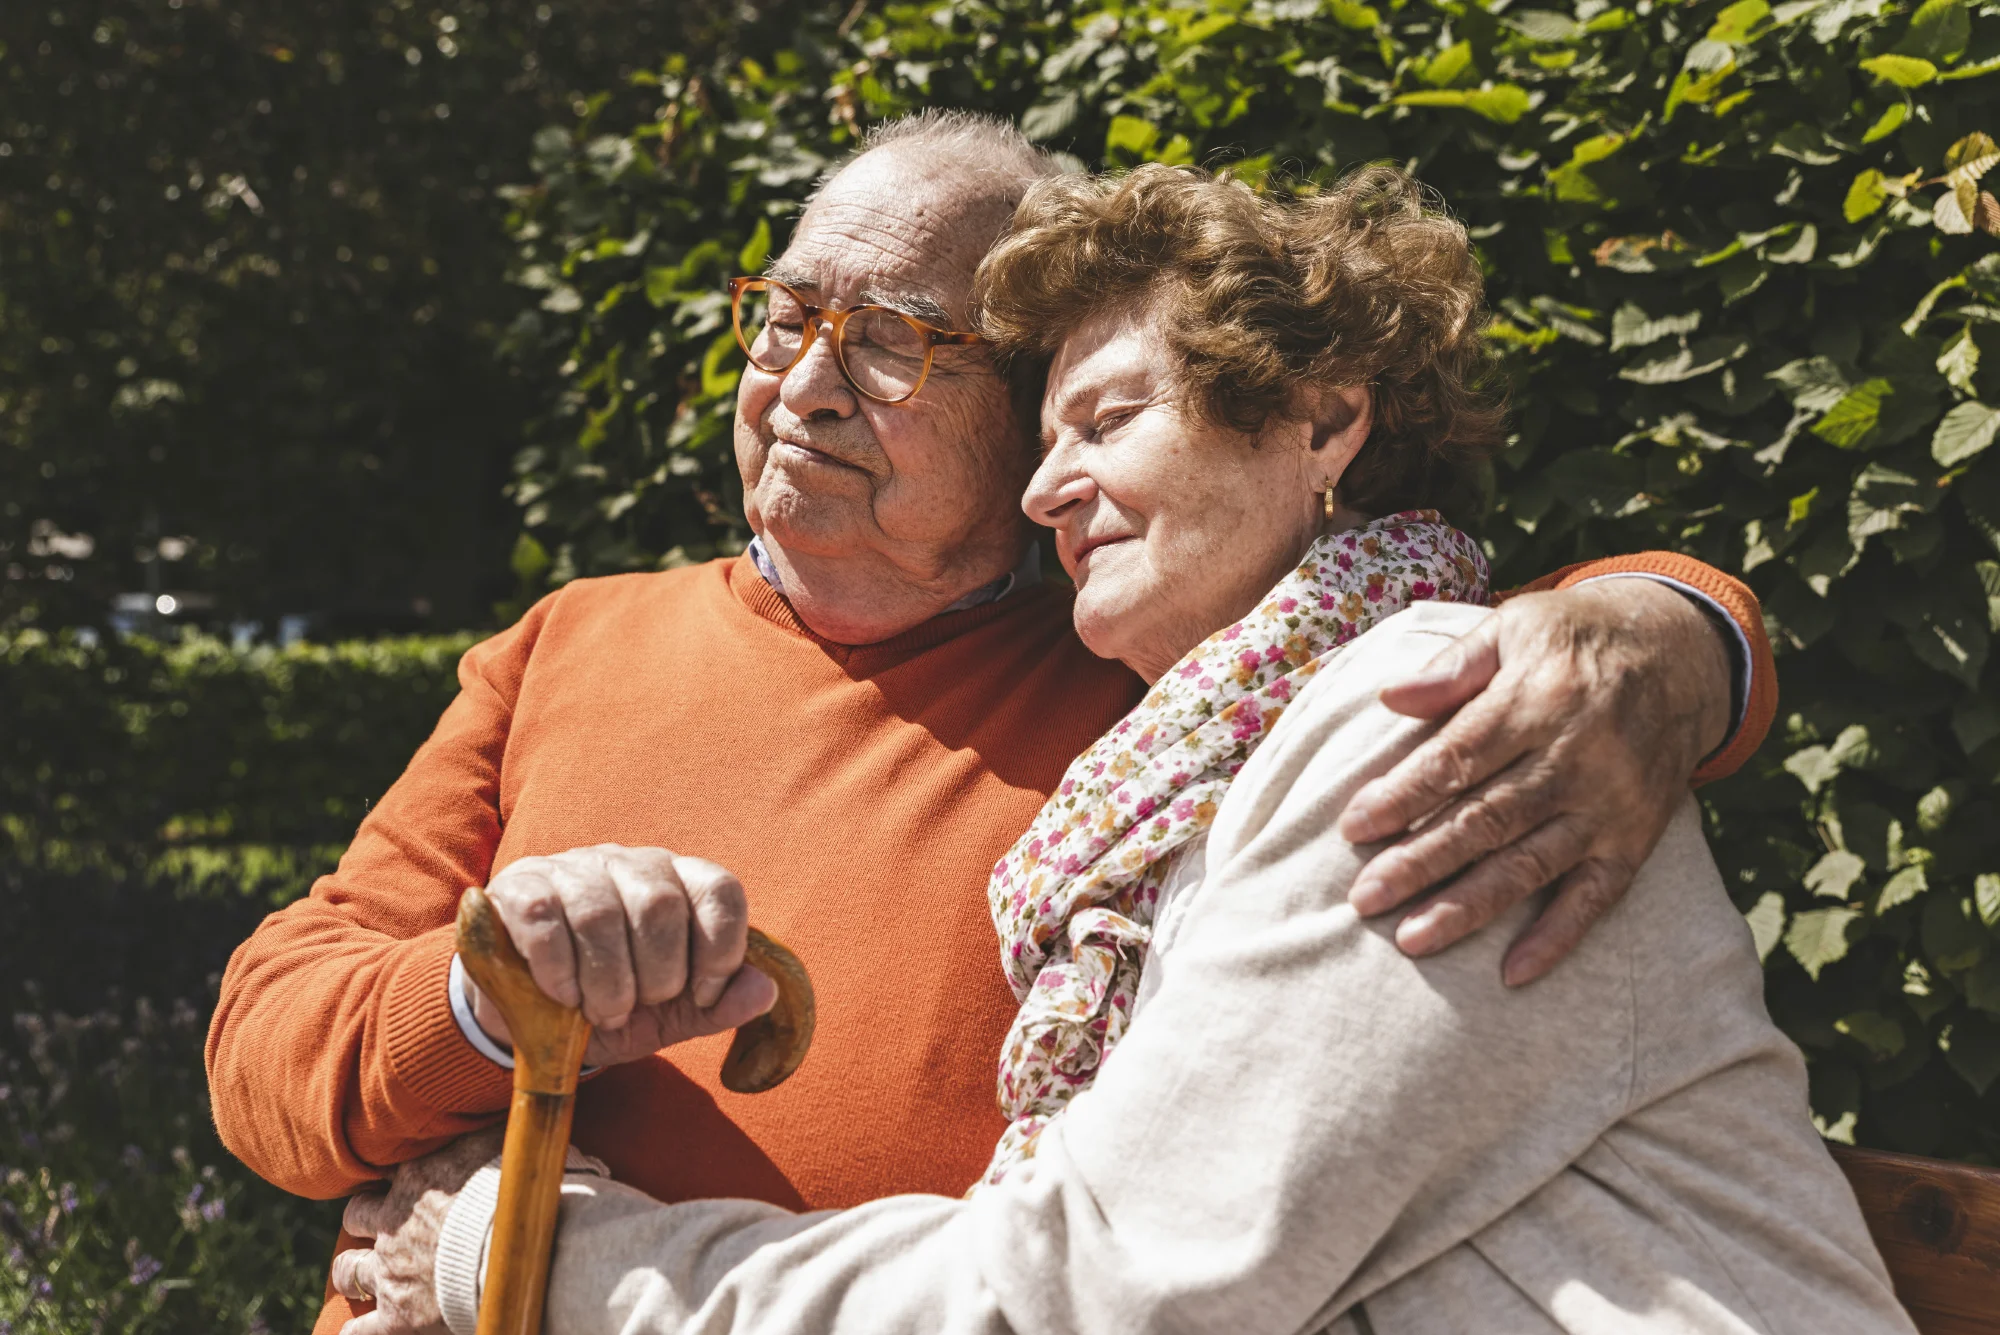 How To Protect Seniors in Memory Care From the Summer Sun